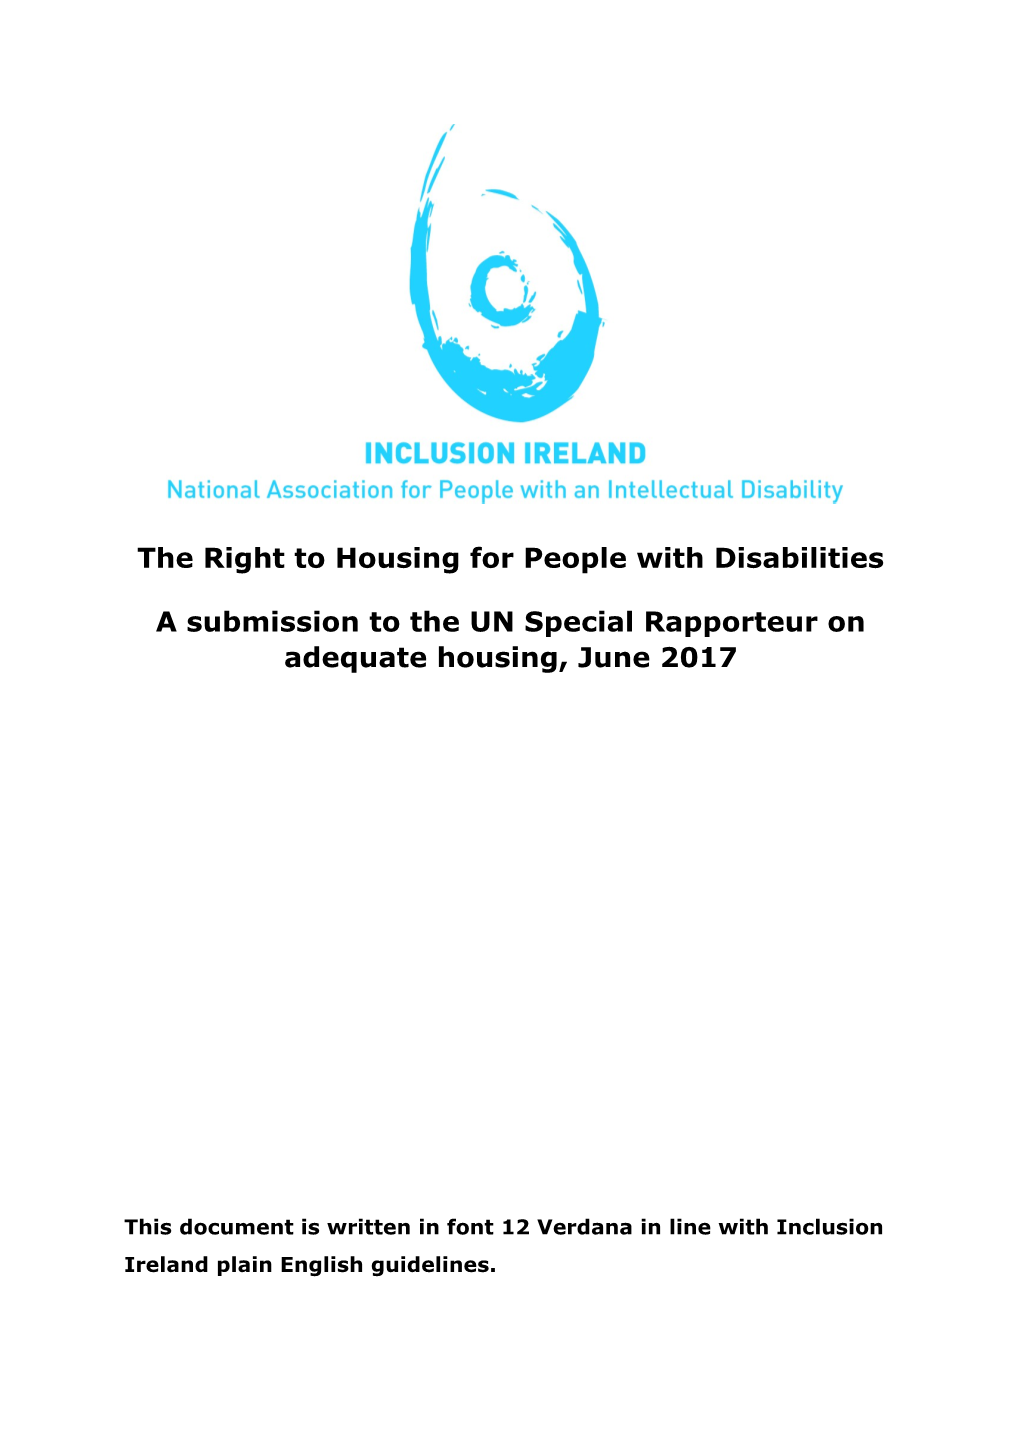 The Right to Housing for People with Disabilities